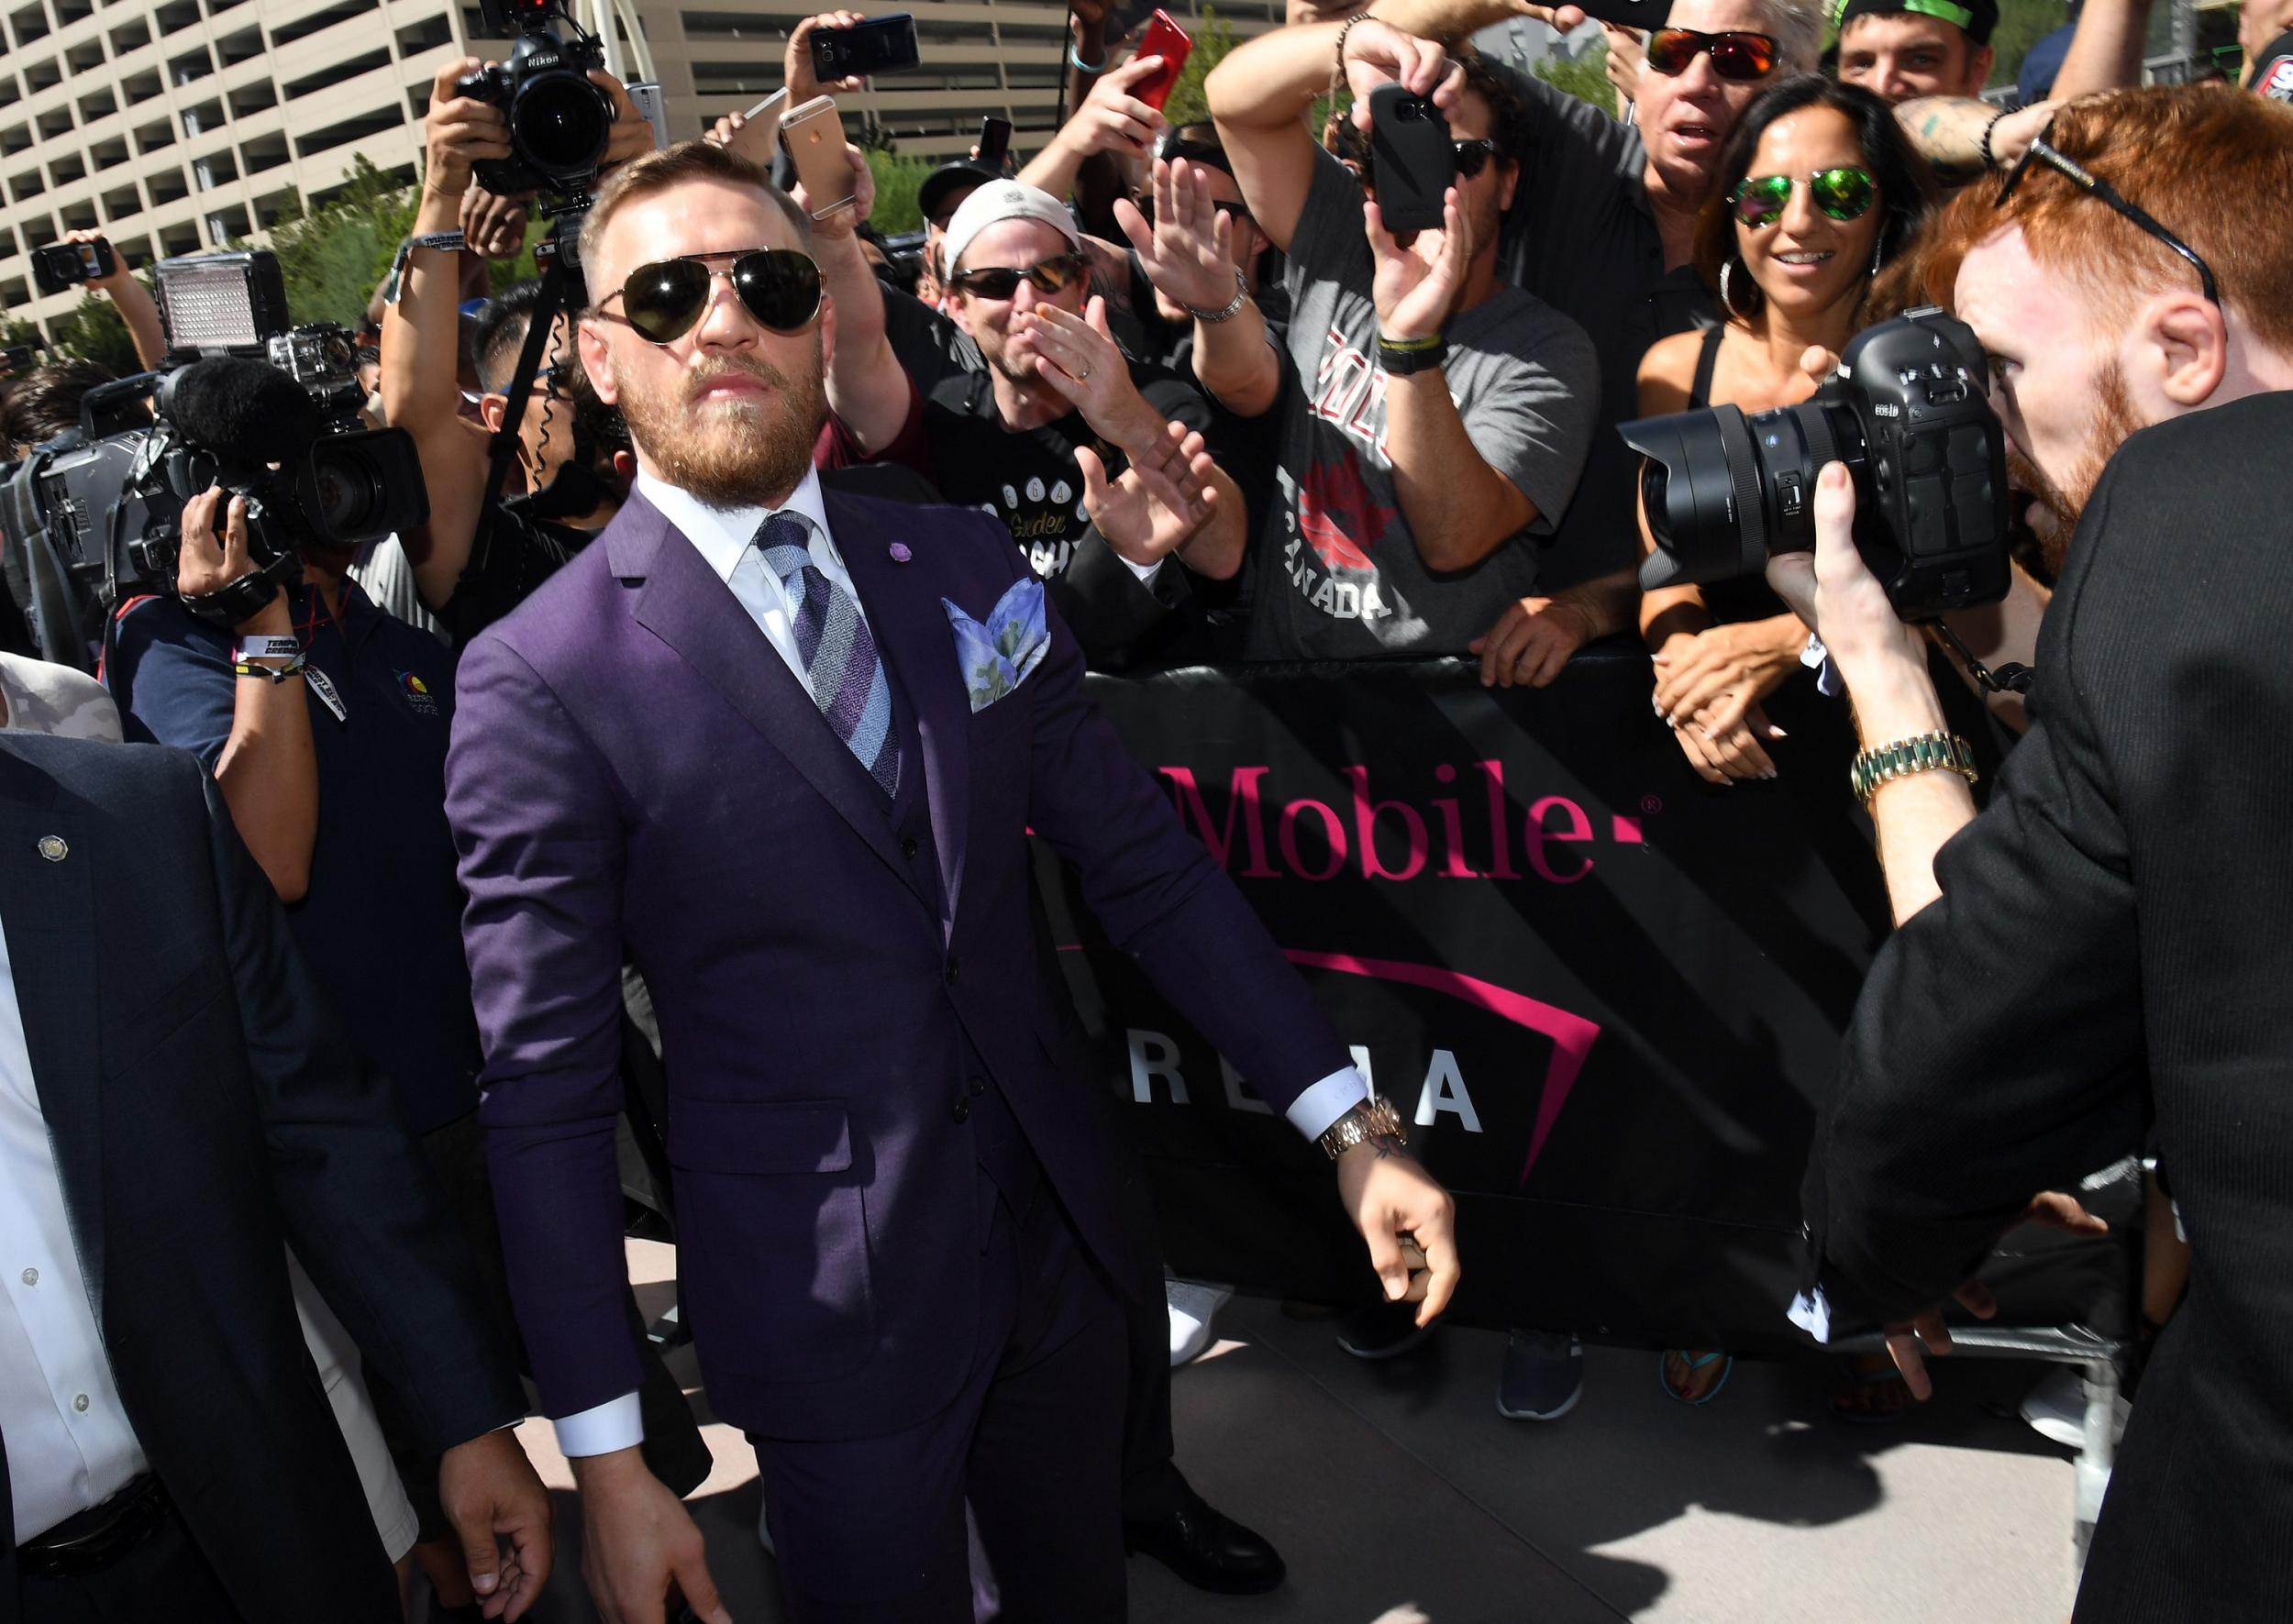 McGregor and Mayweather's entourages clashes in Las Vegas on Tuesday